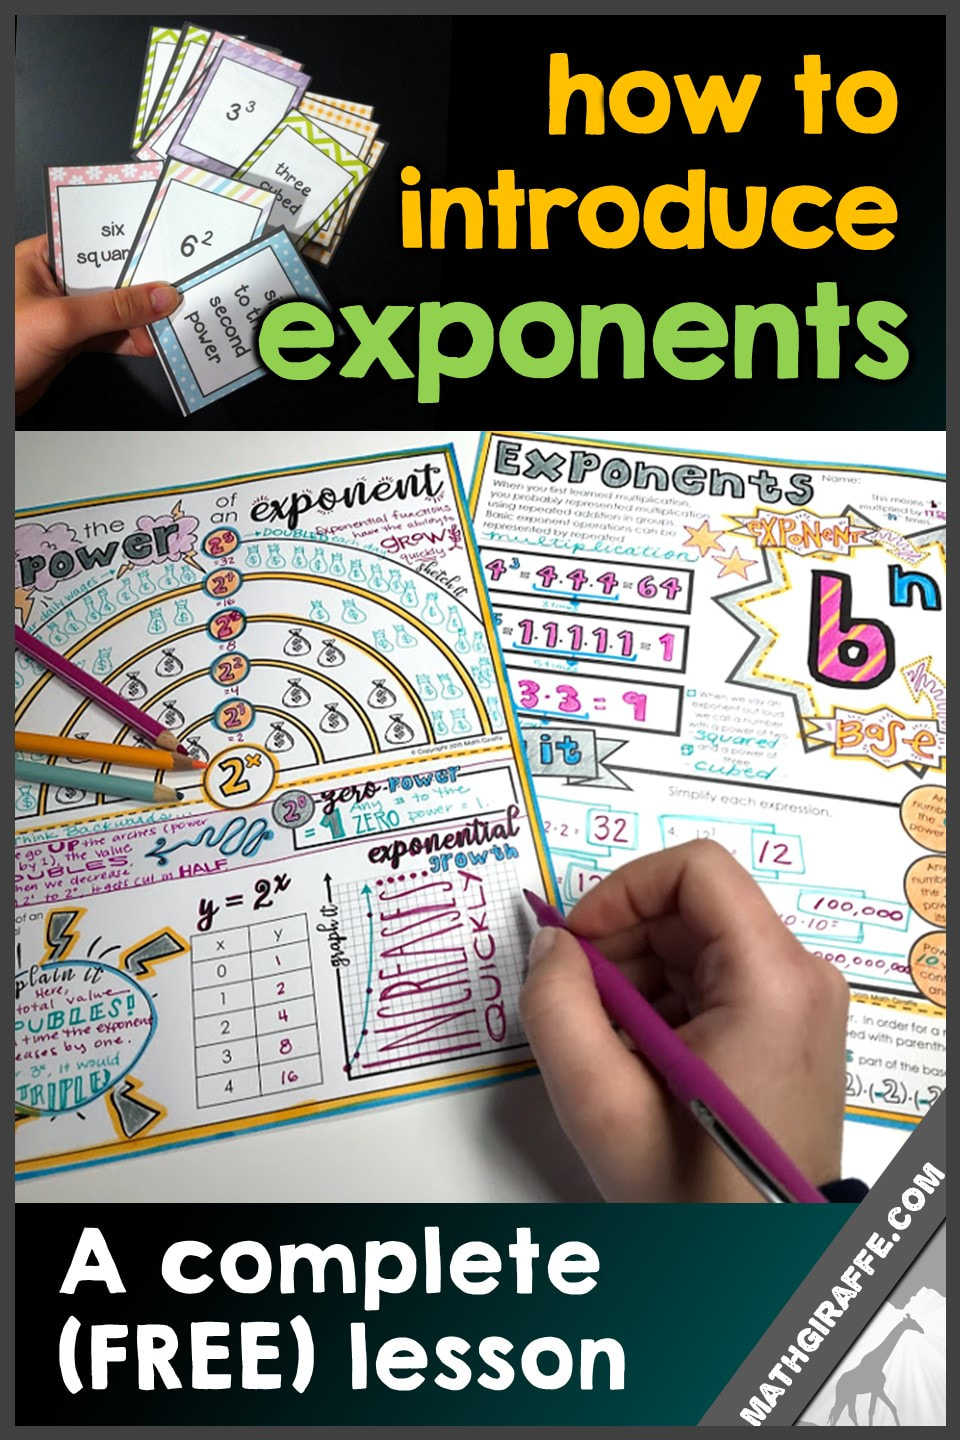 Introducing Exponents - a free lesson for 5th and 6th grade math (free)